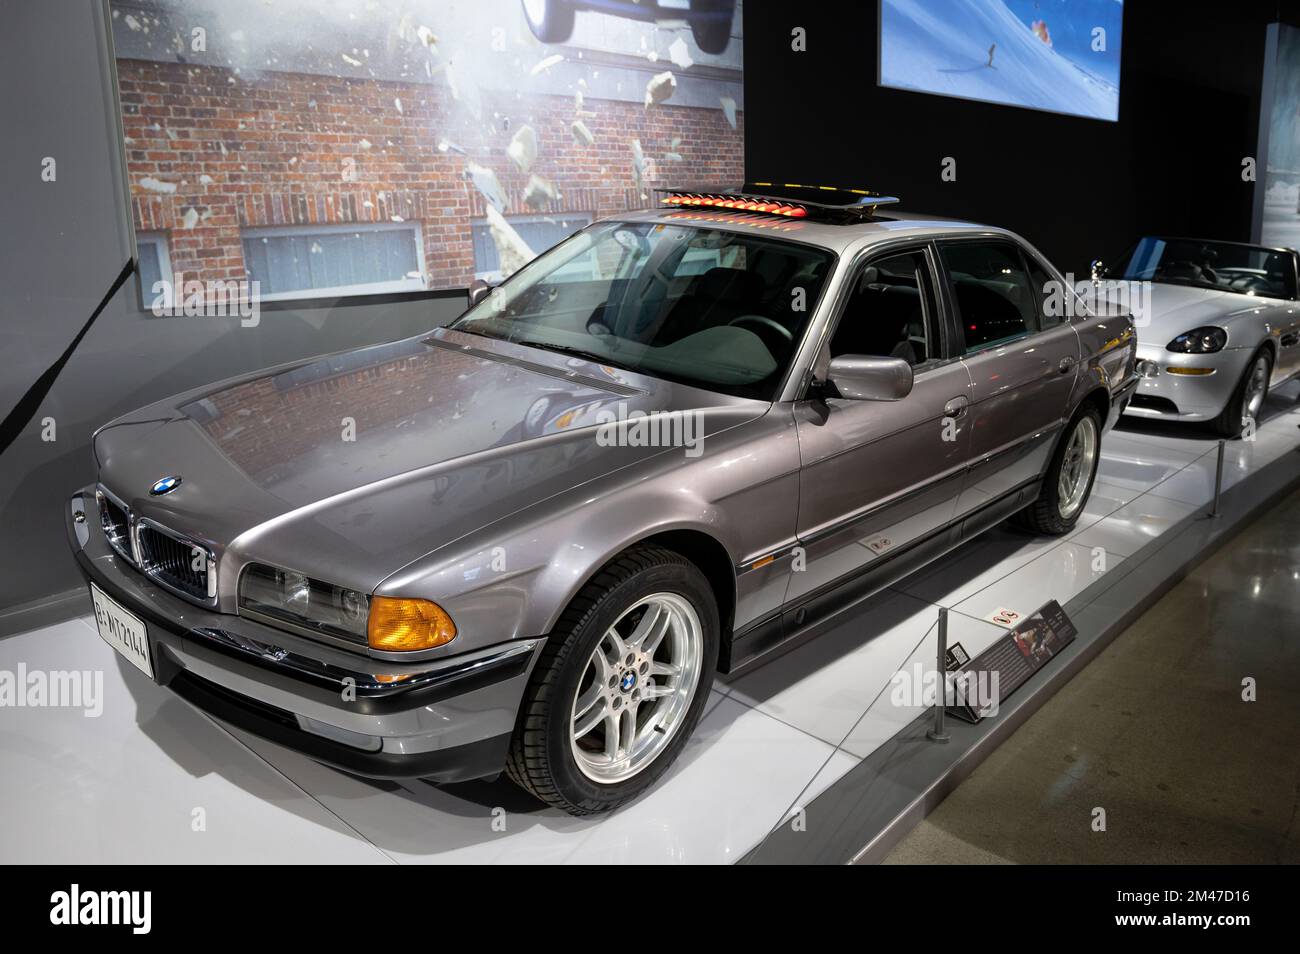 BMW E38 7-series editorial stock photo. Image of engine - 64295303